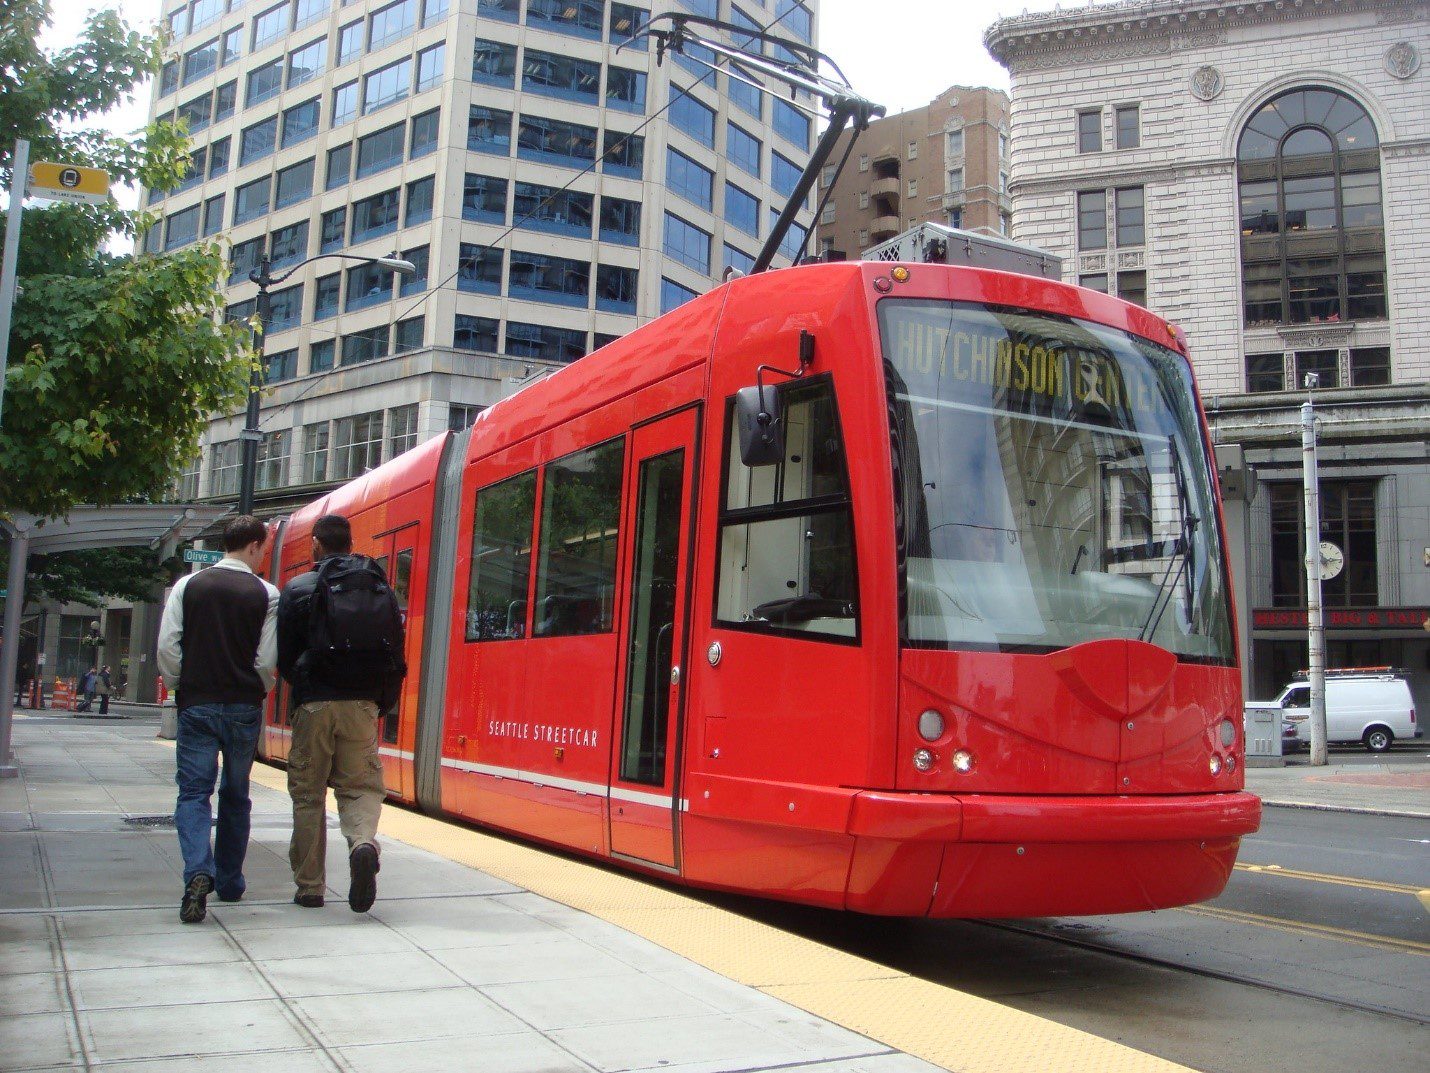 A red Seattle Streetcar train waits for people to board, with large buildings in the background. Two people are to the left.